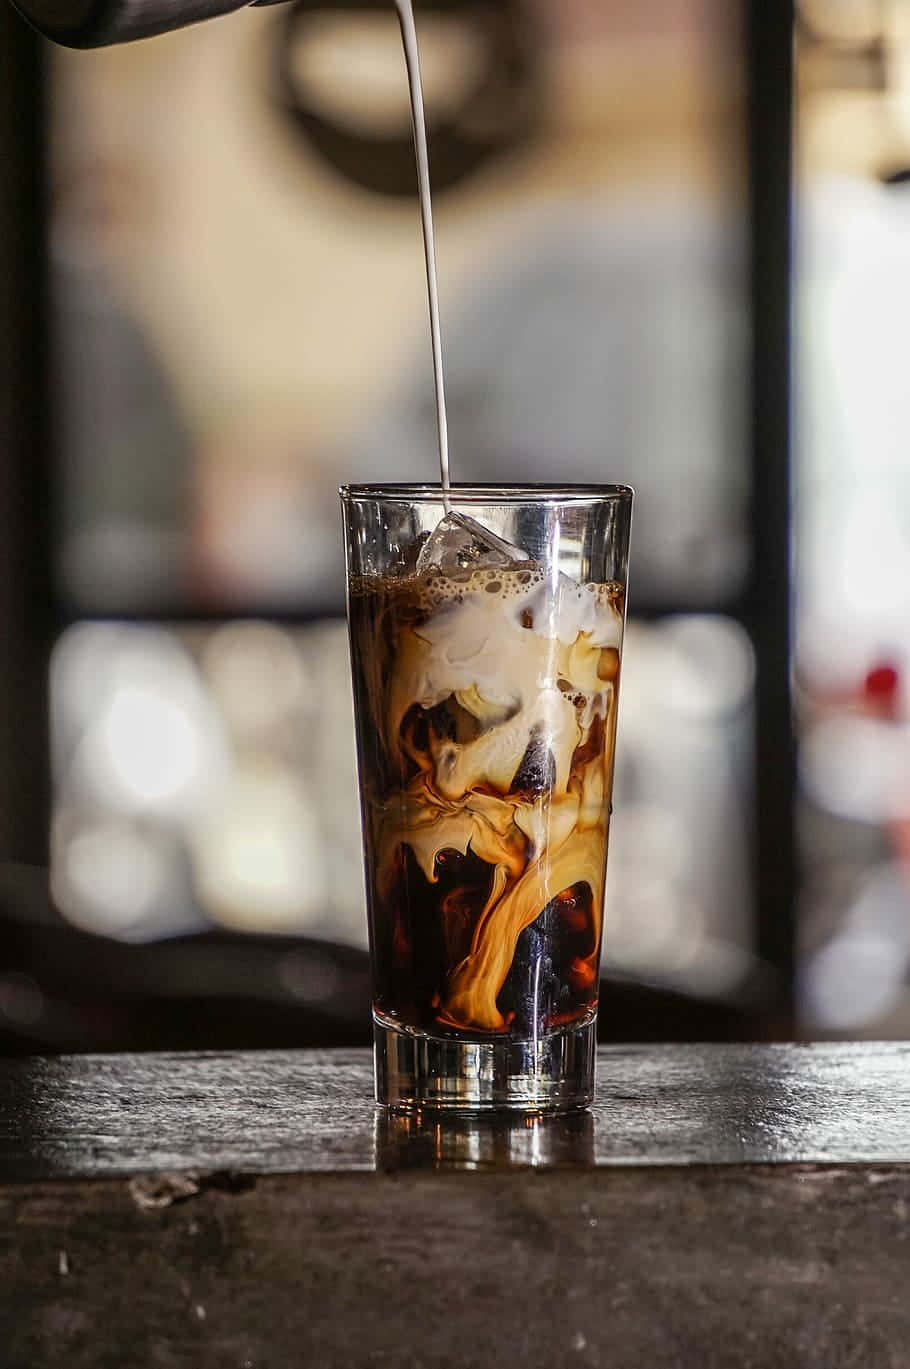 A Glass Of Iced Coffee Being Poured Into A Glass